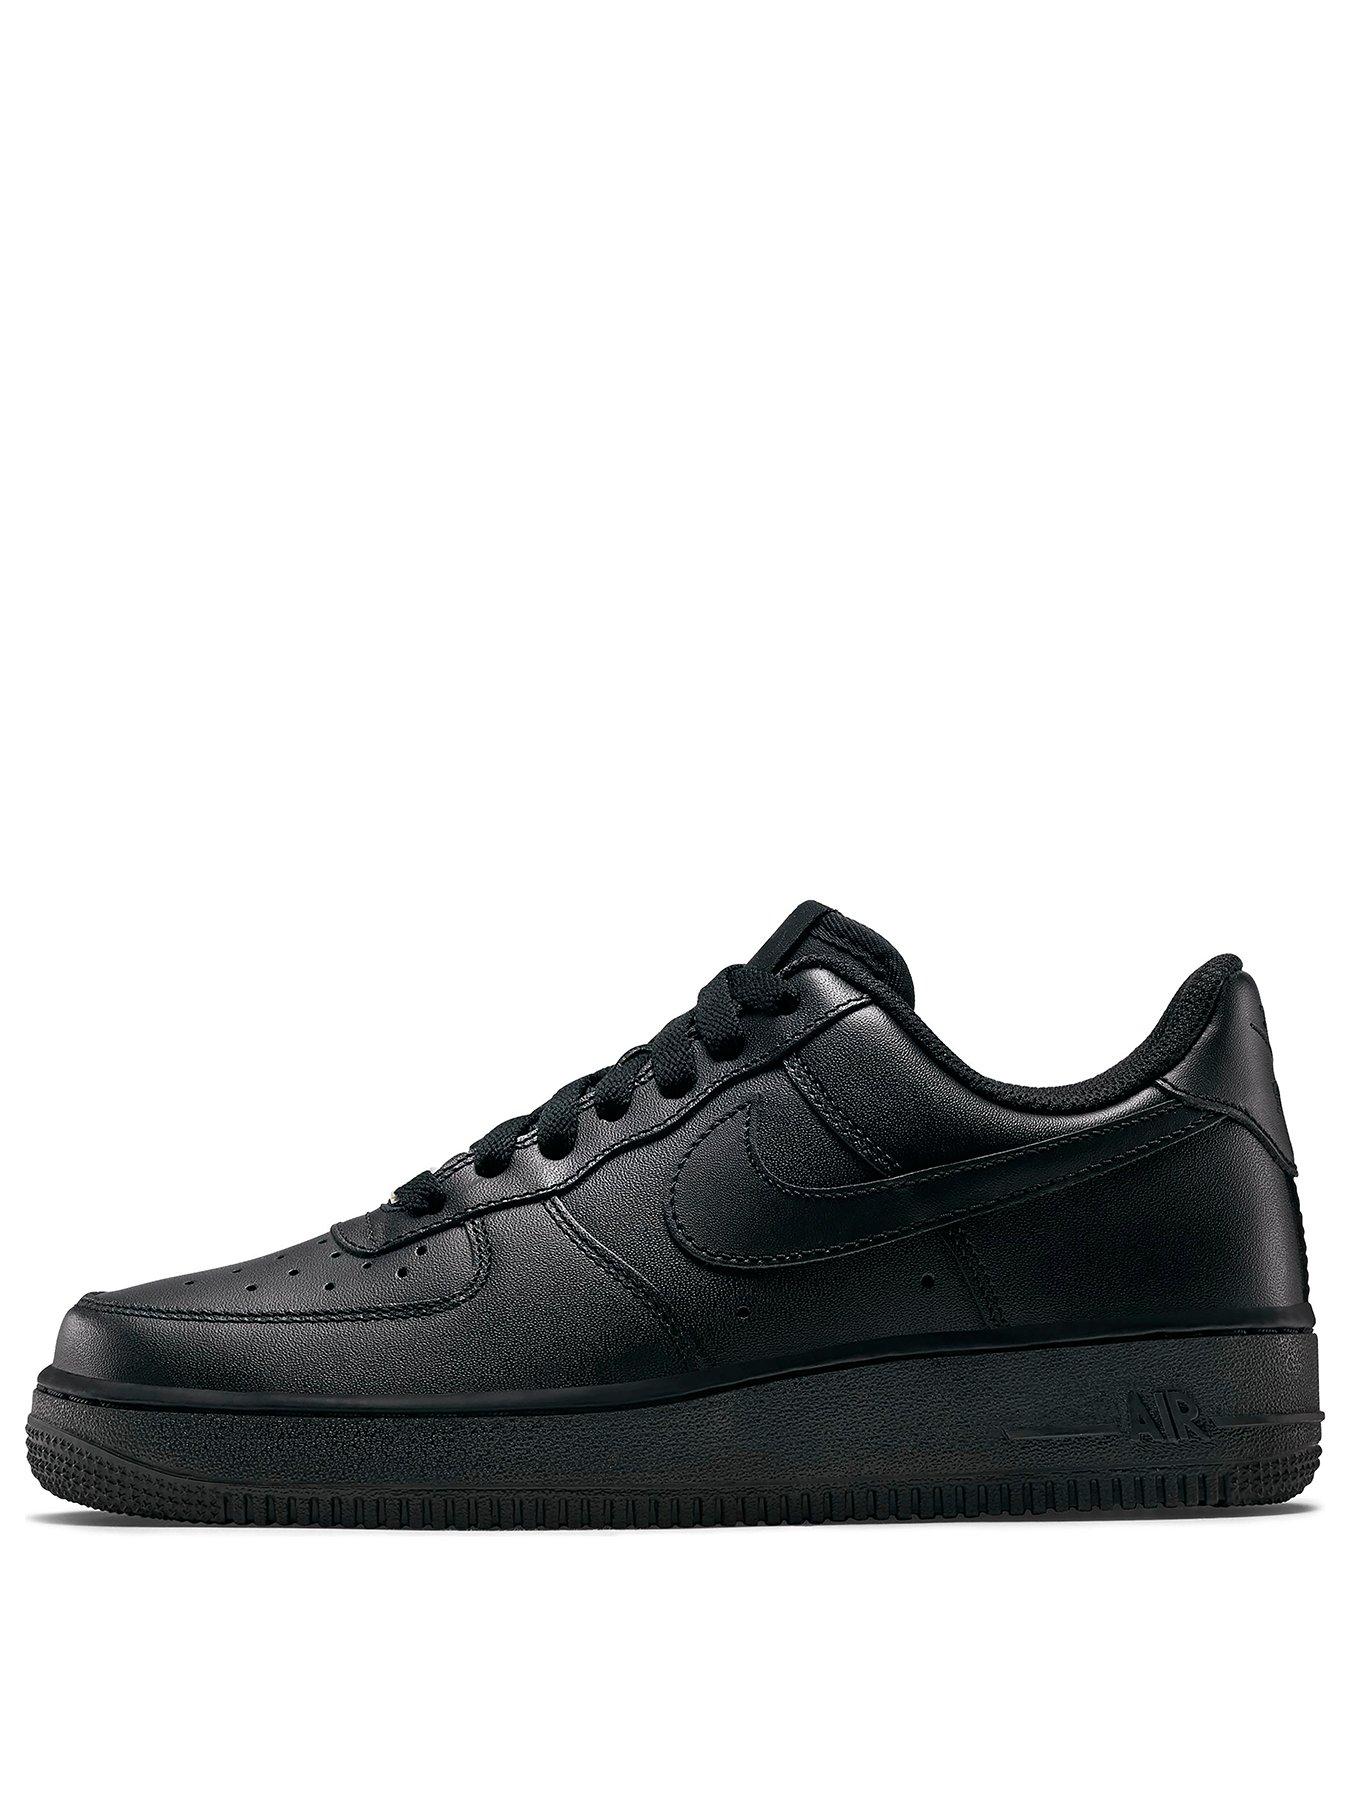 Nike Air Force 1 | www.littlewoods.com